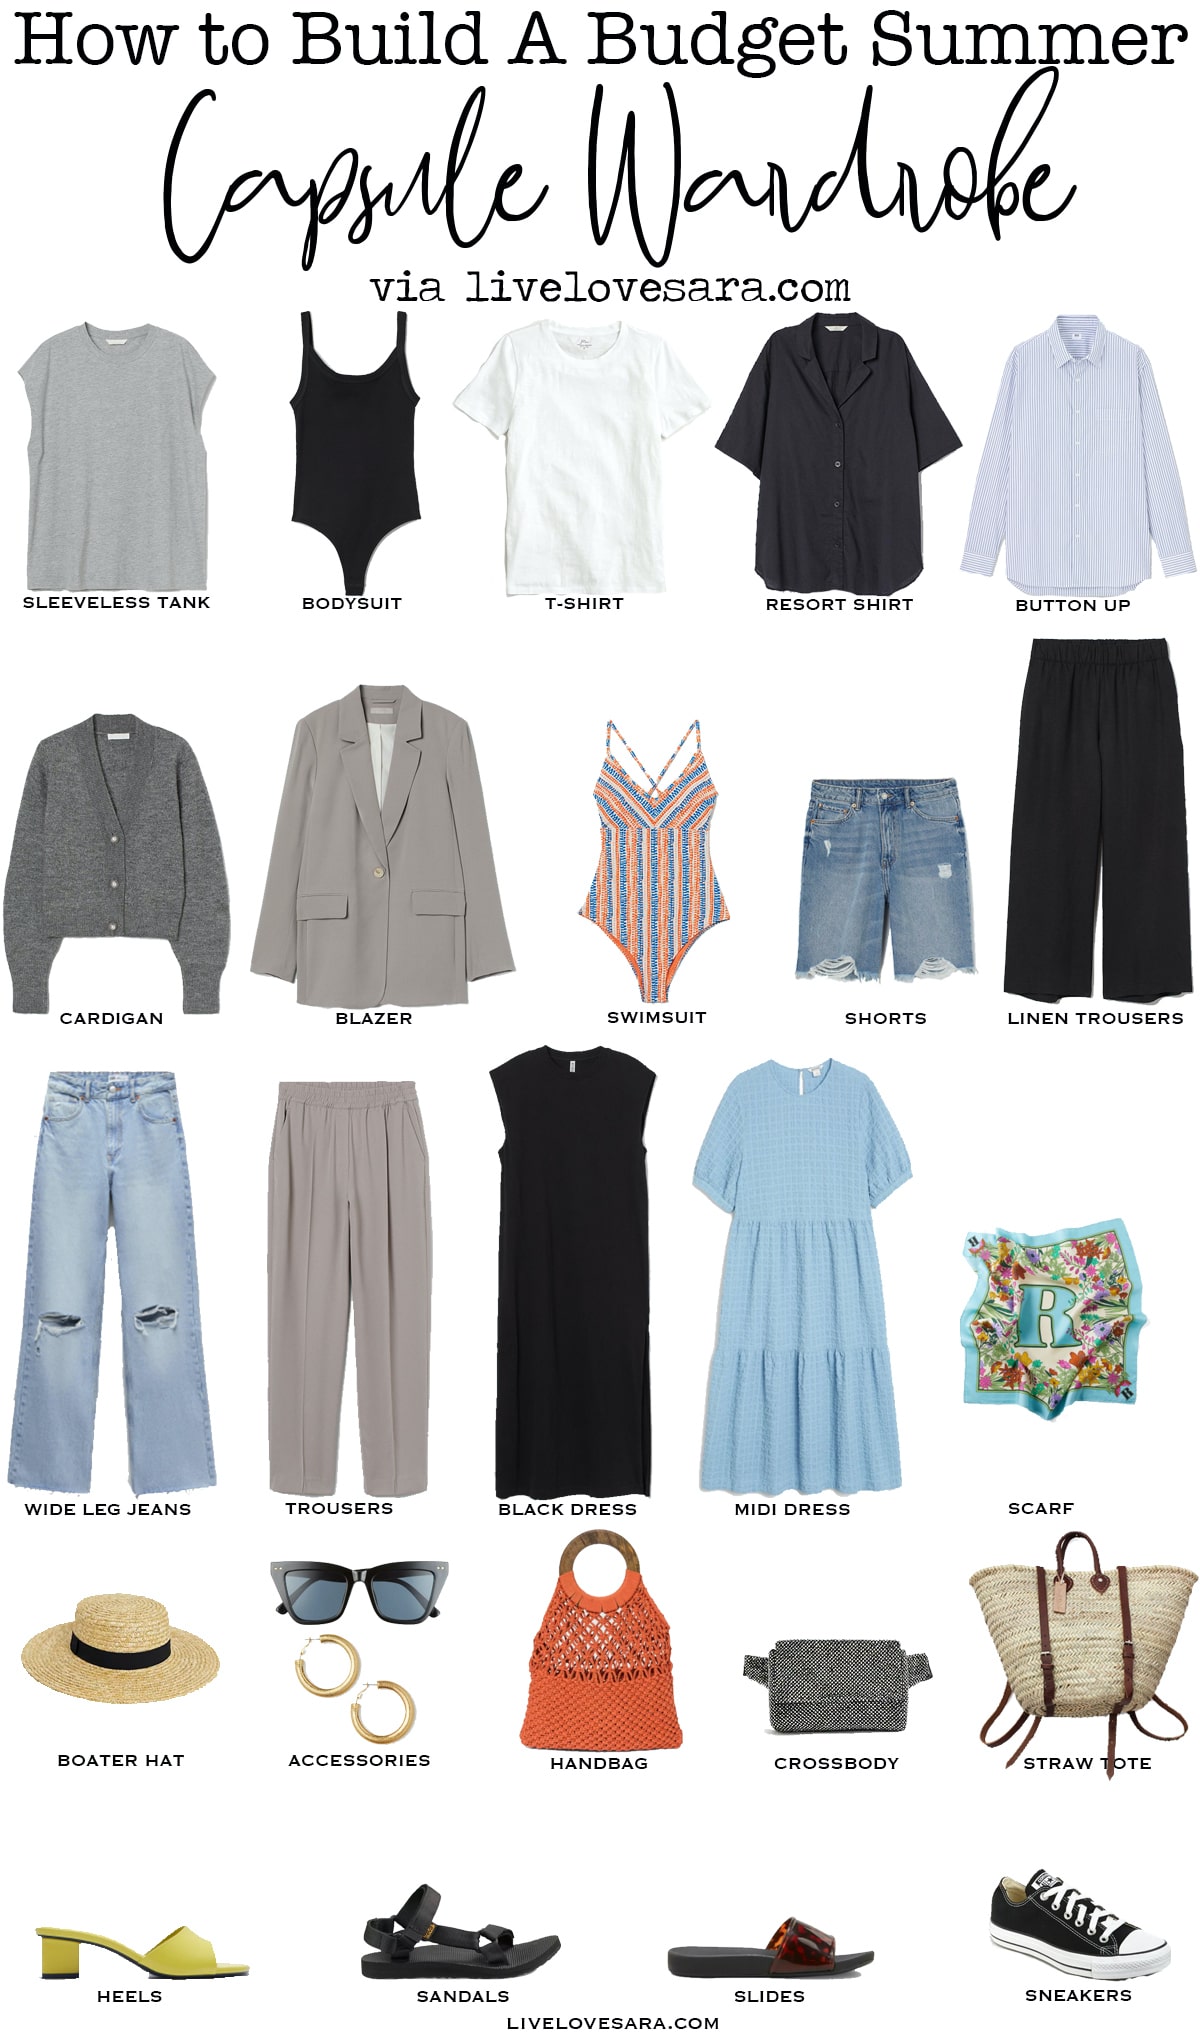 How to Build a Summer Capsule Wardrobe on a Budget 2021 - livelovesara